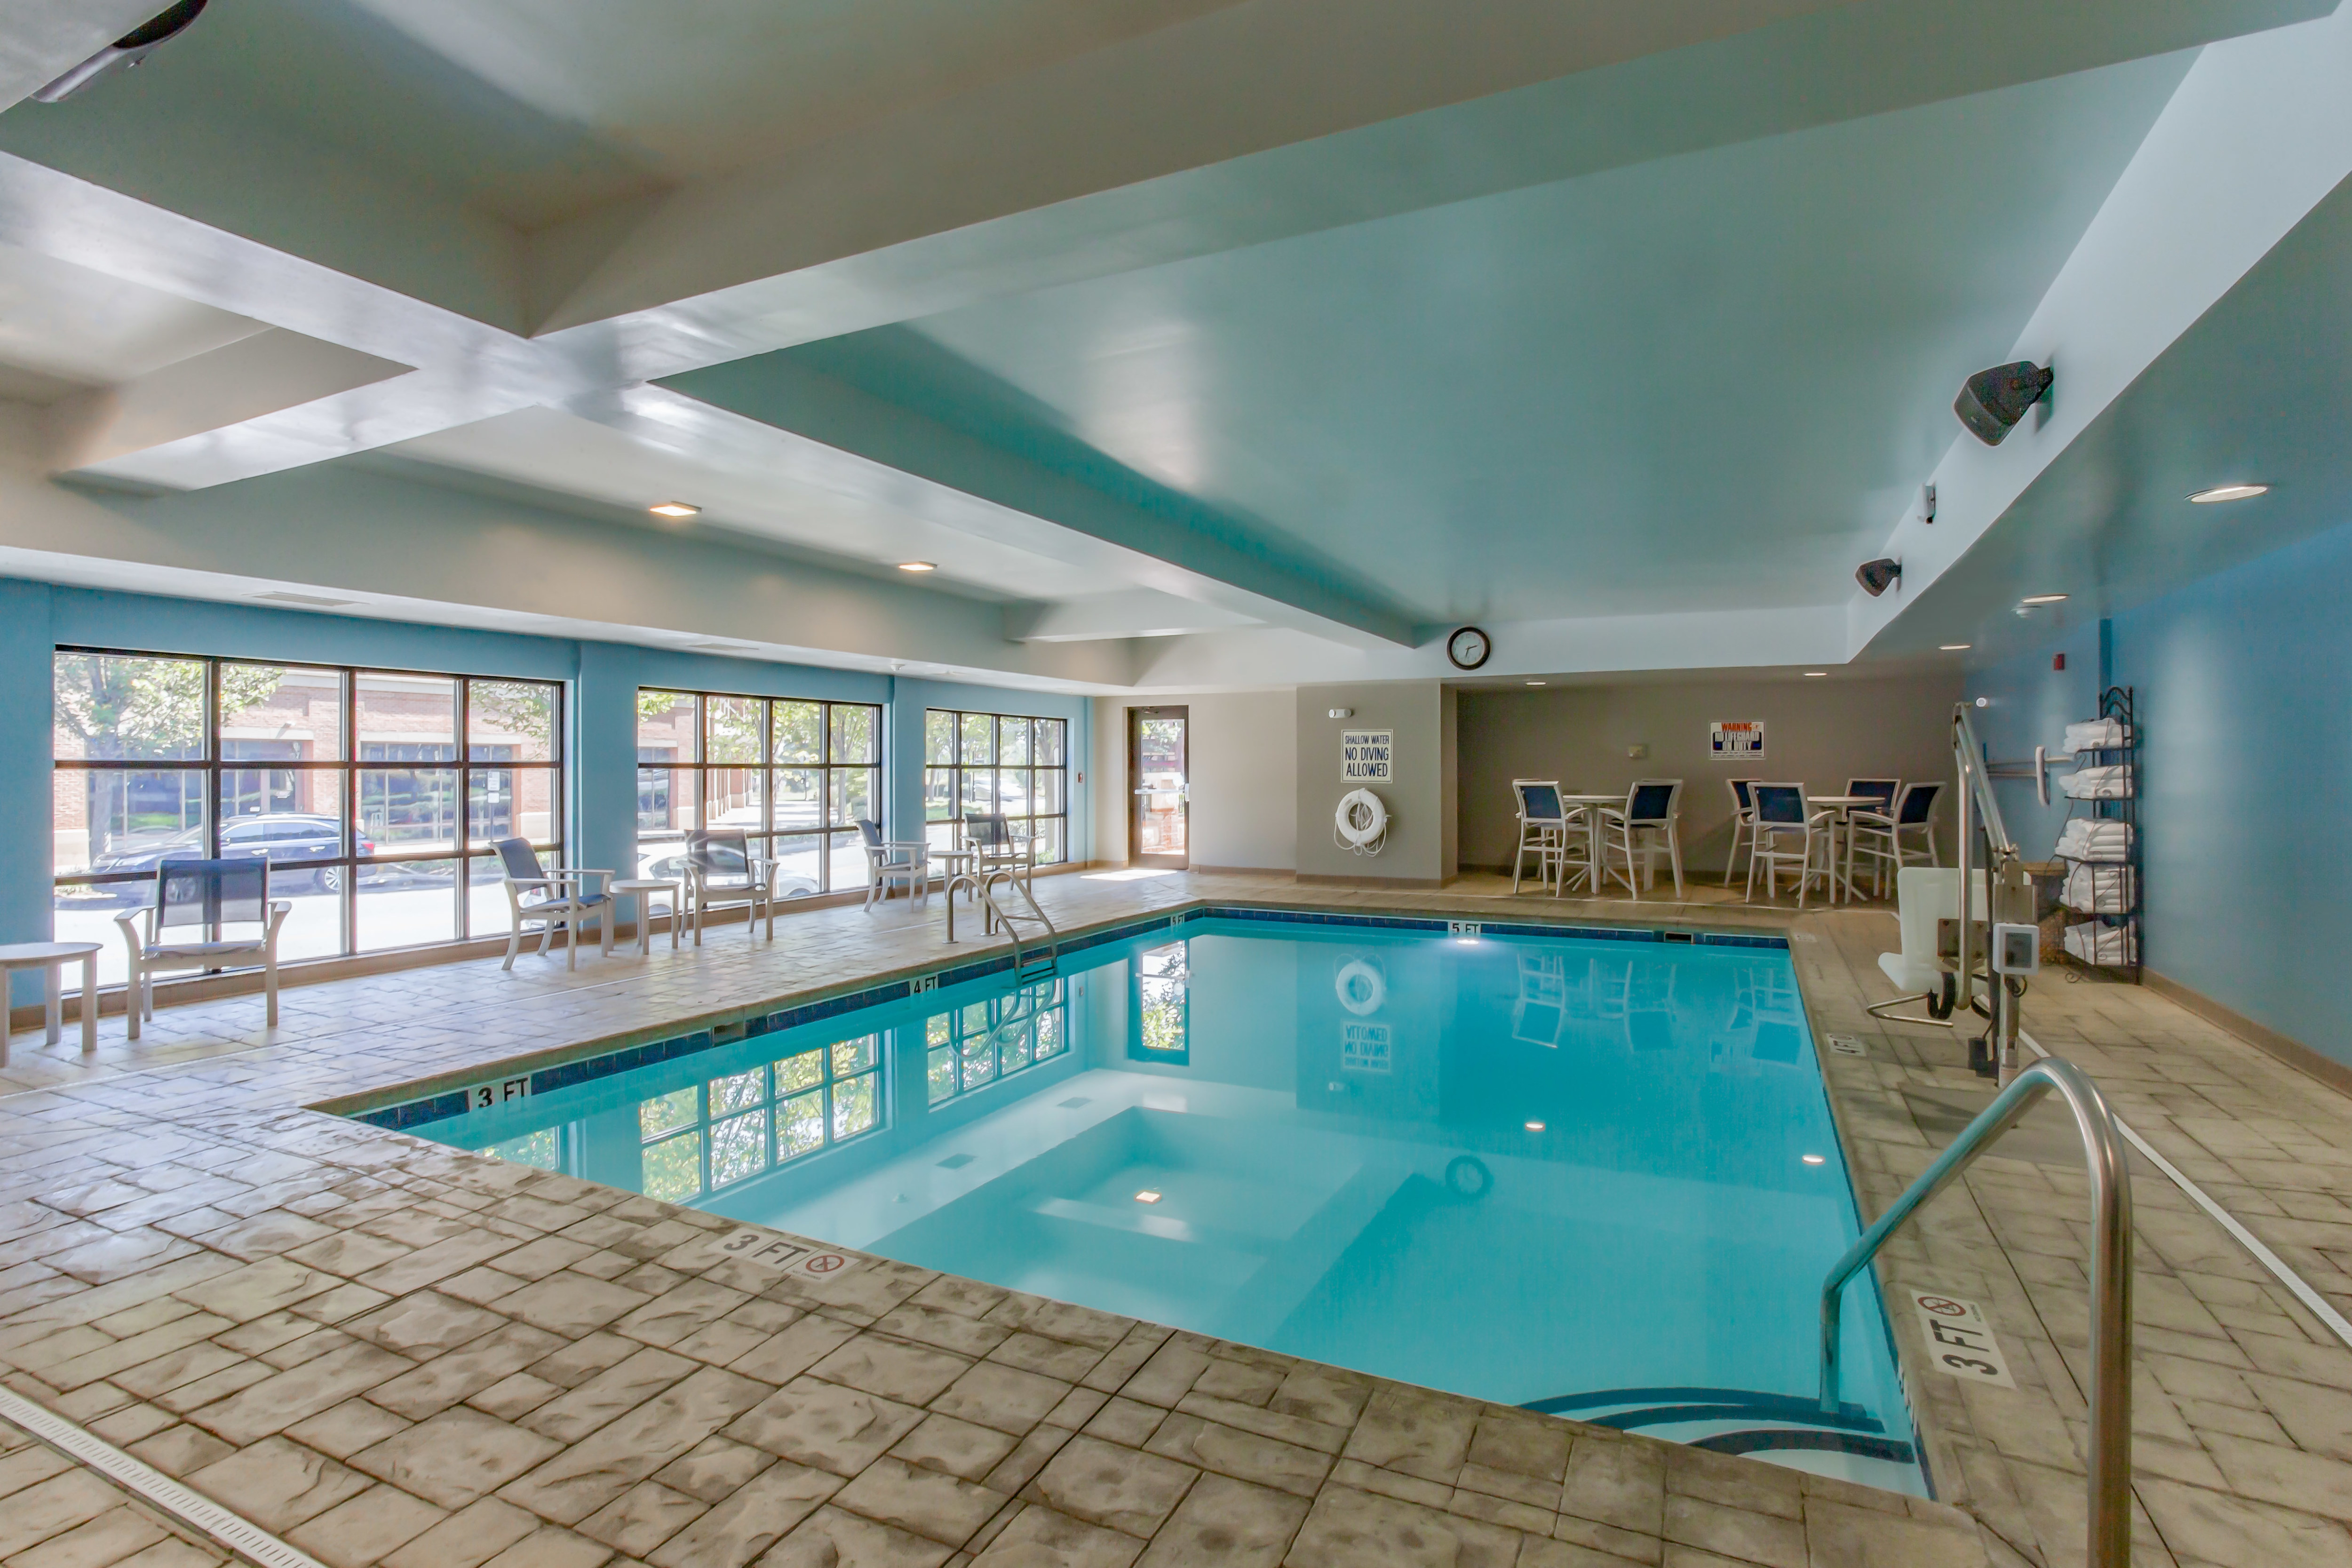 Indoor Pool Area with Seating Area and Large Windows